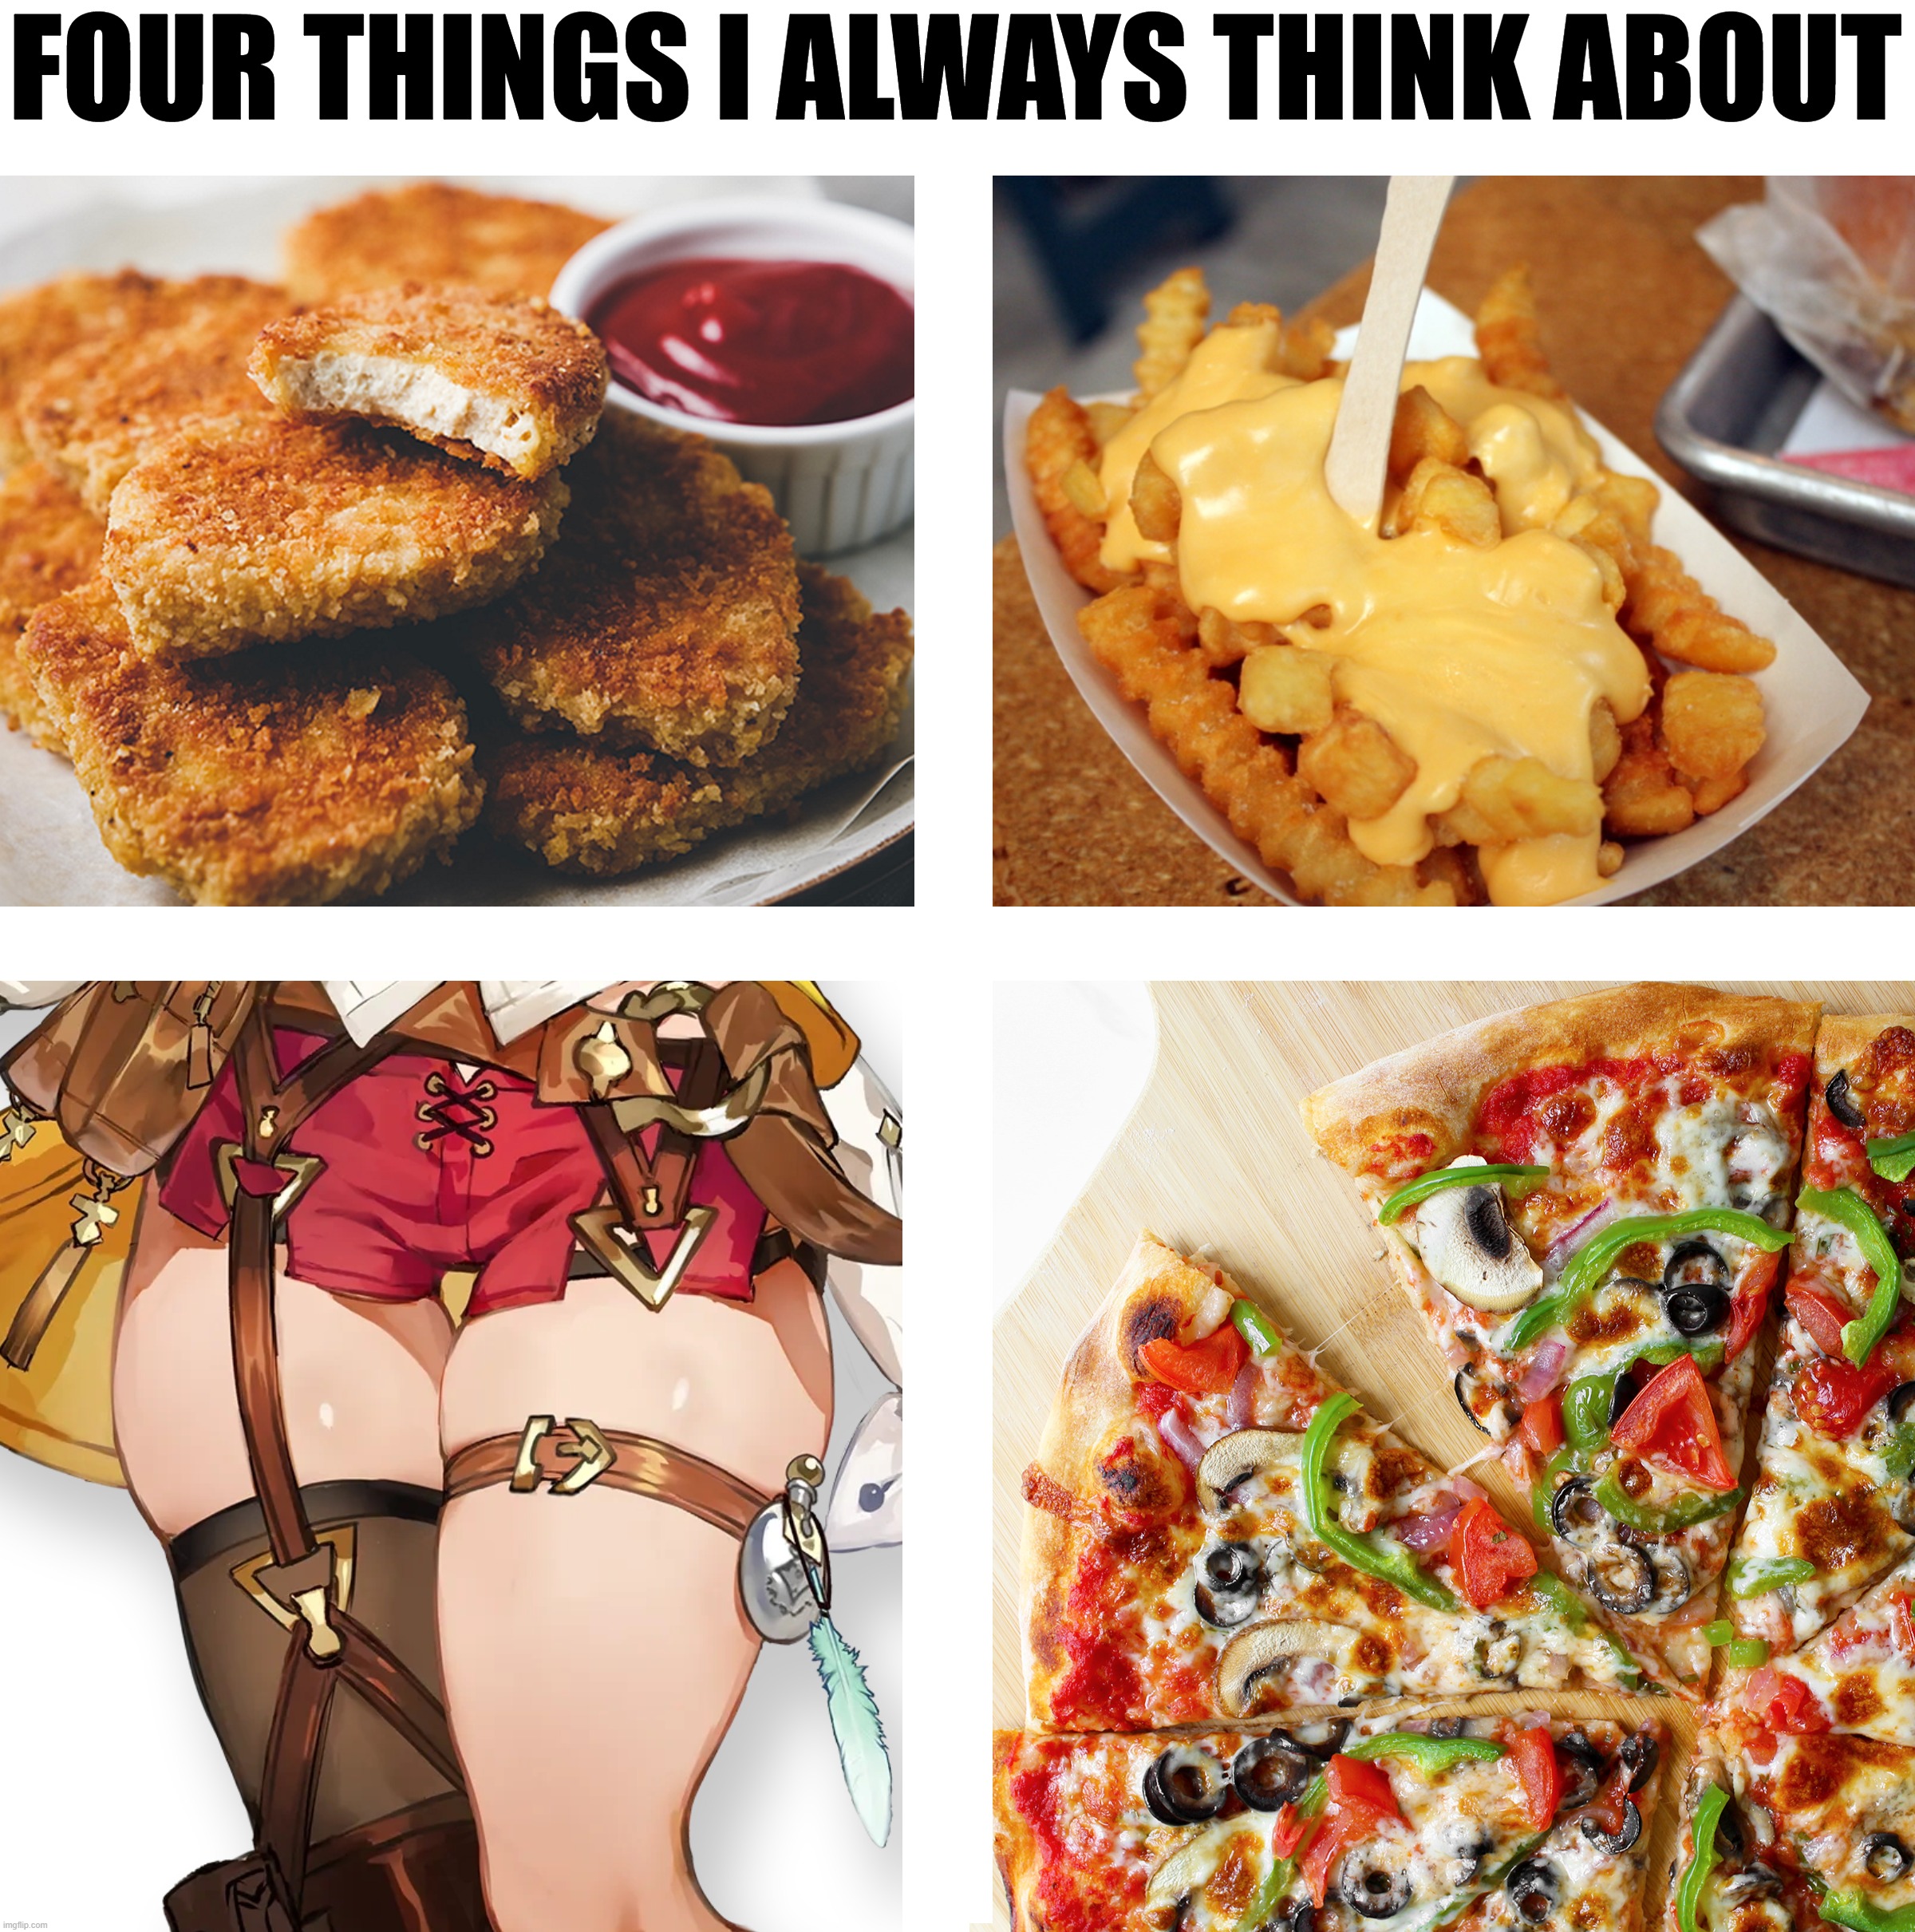 FOUR THINGS I ALWAYS THINK ABOUT | made w/ Imgflip meme maker